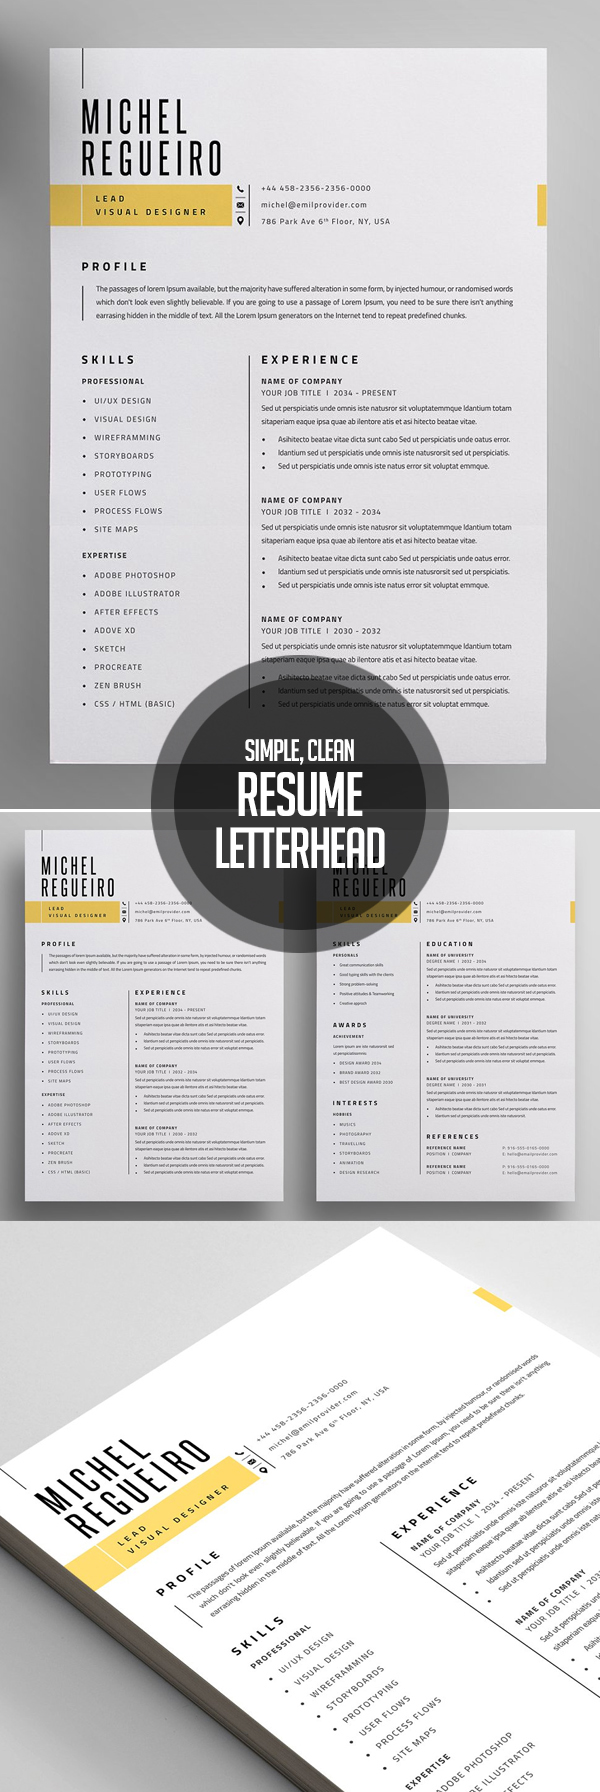 Clean Resume and Letterhead Design